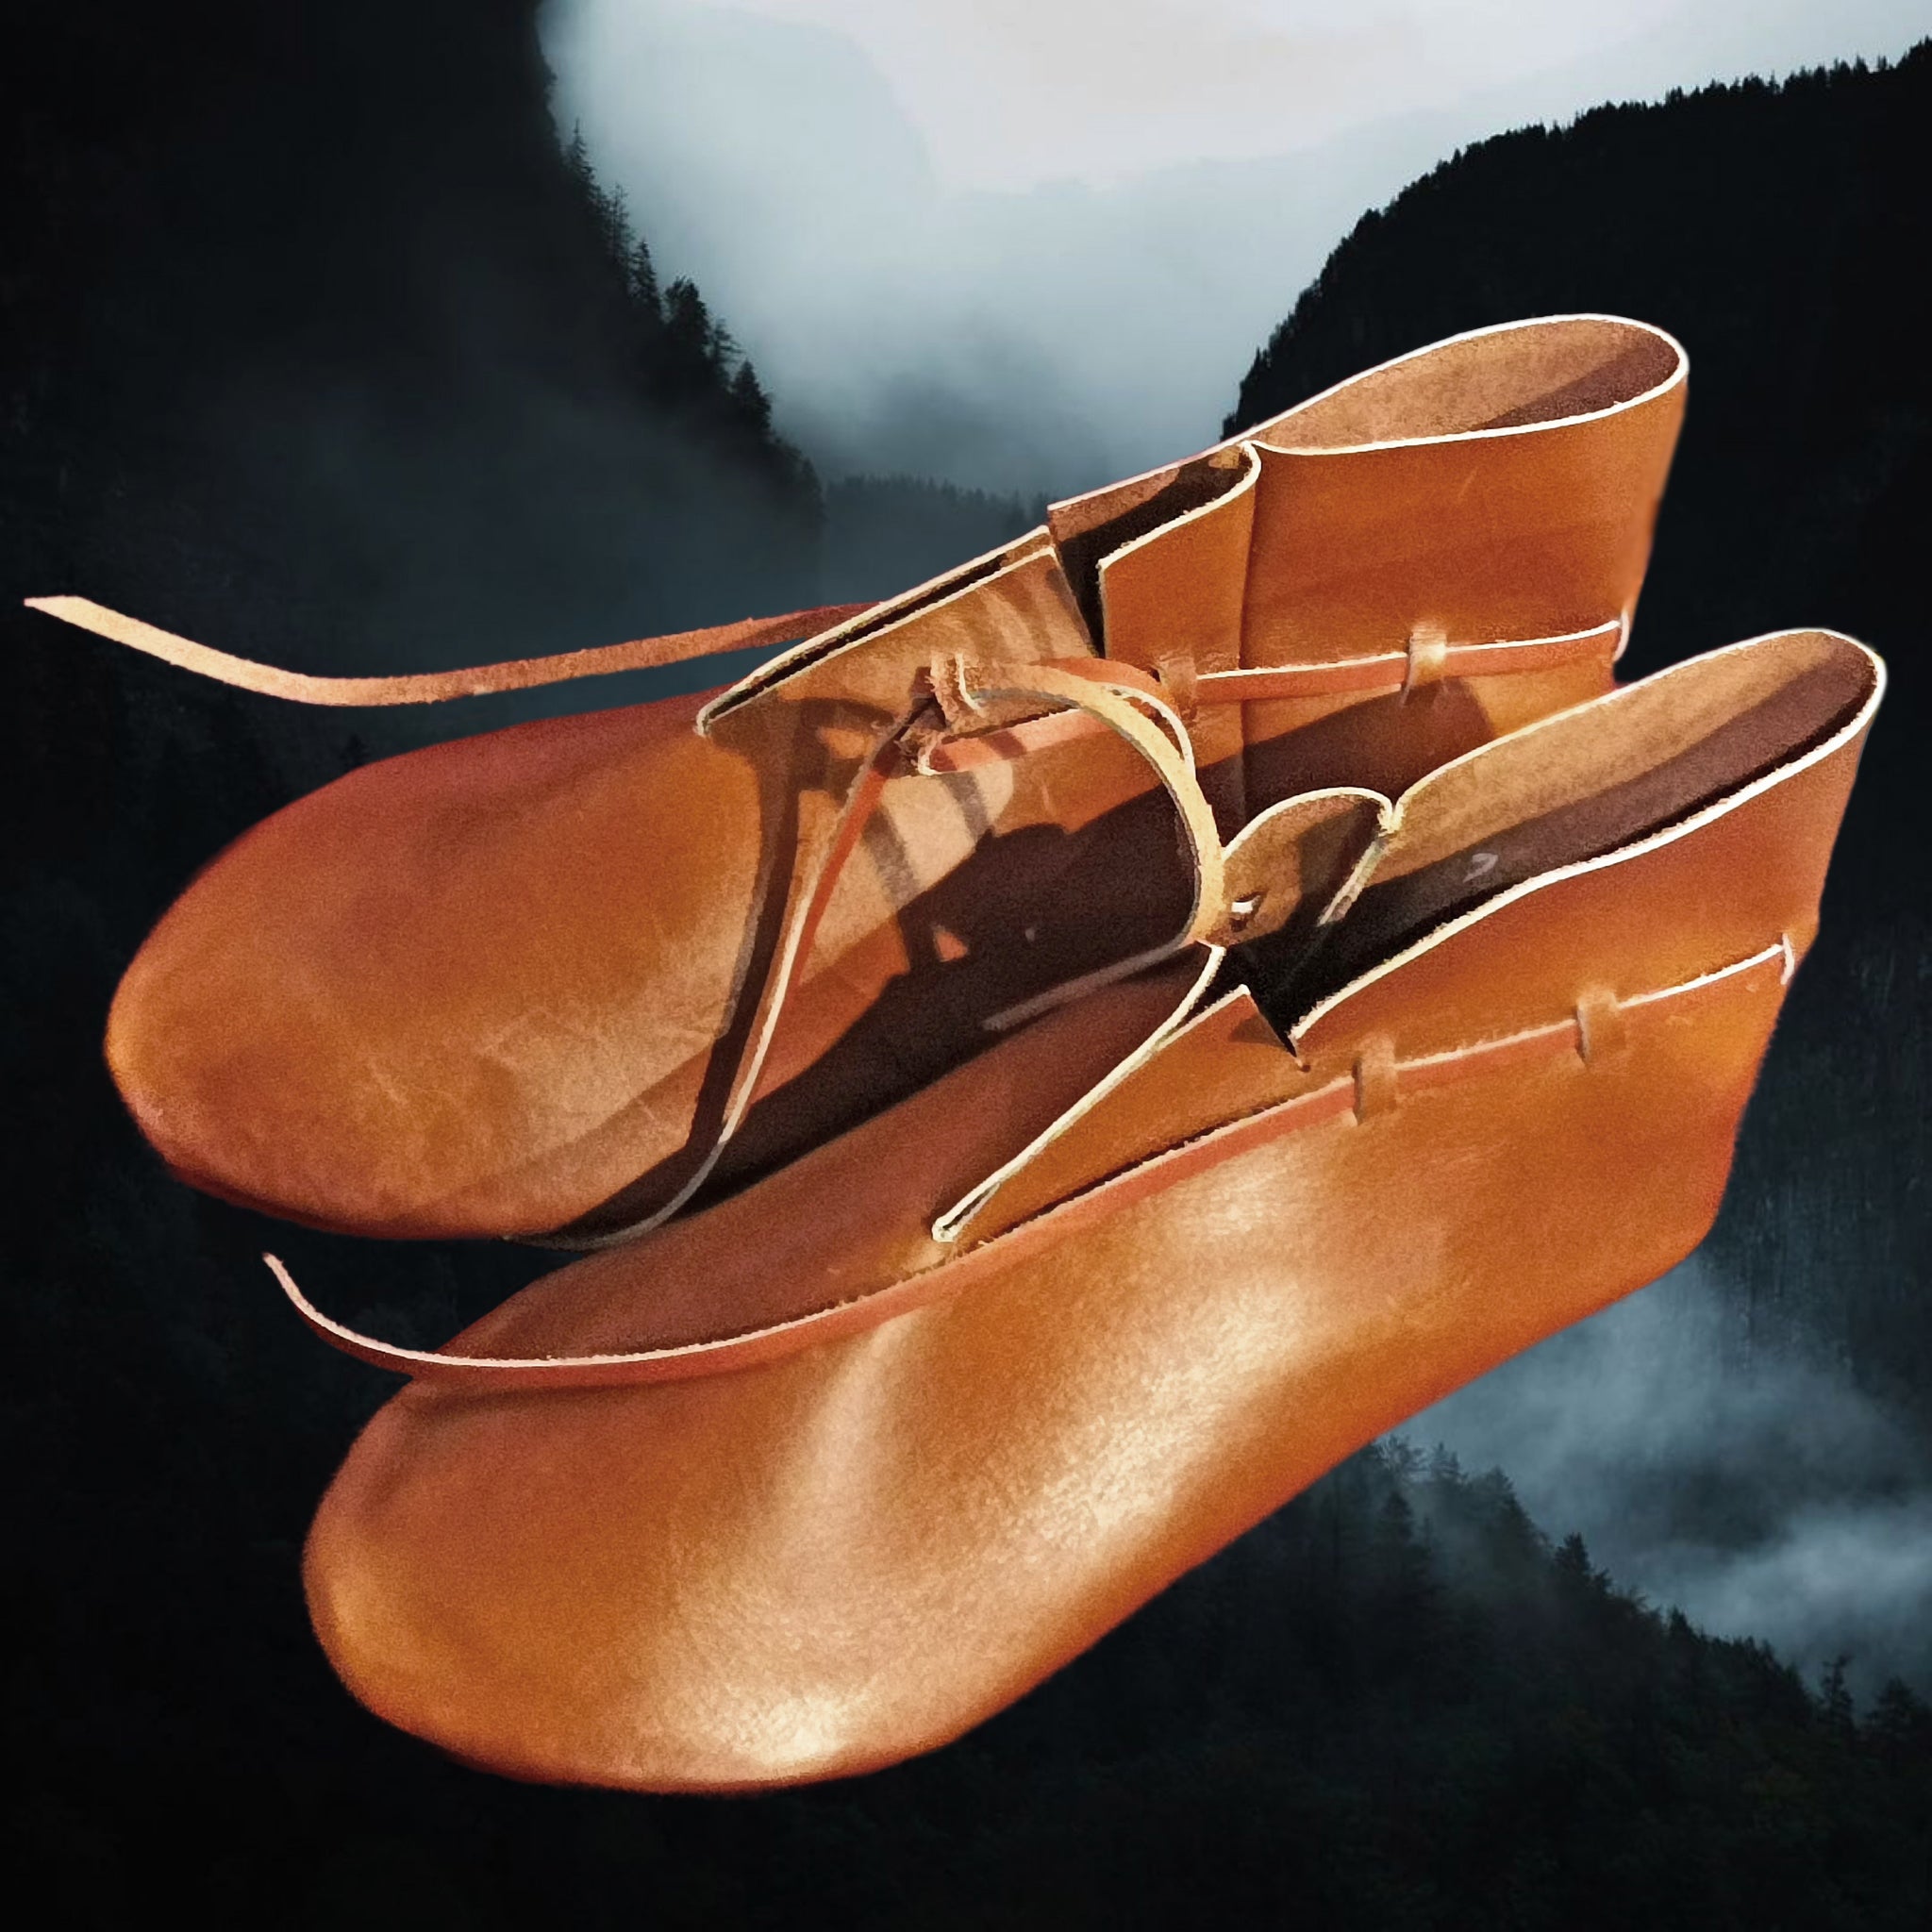 Leather Replica Viking Shoes from York - Above Angle